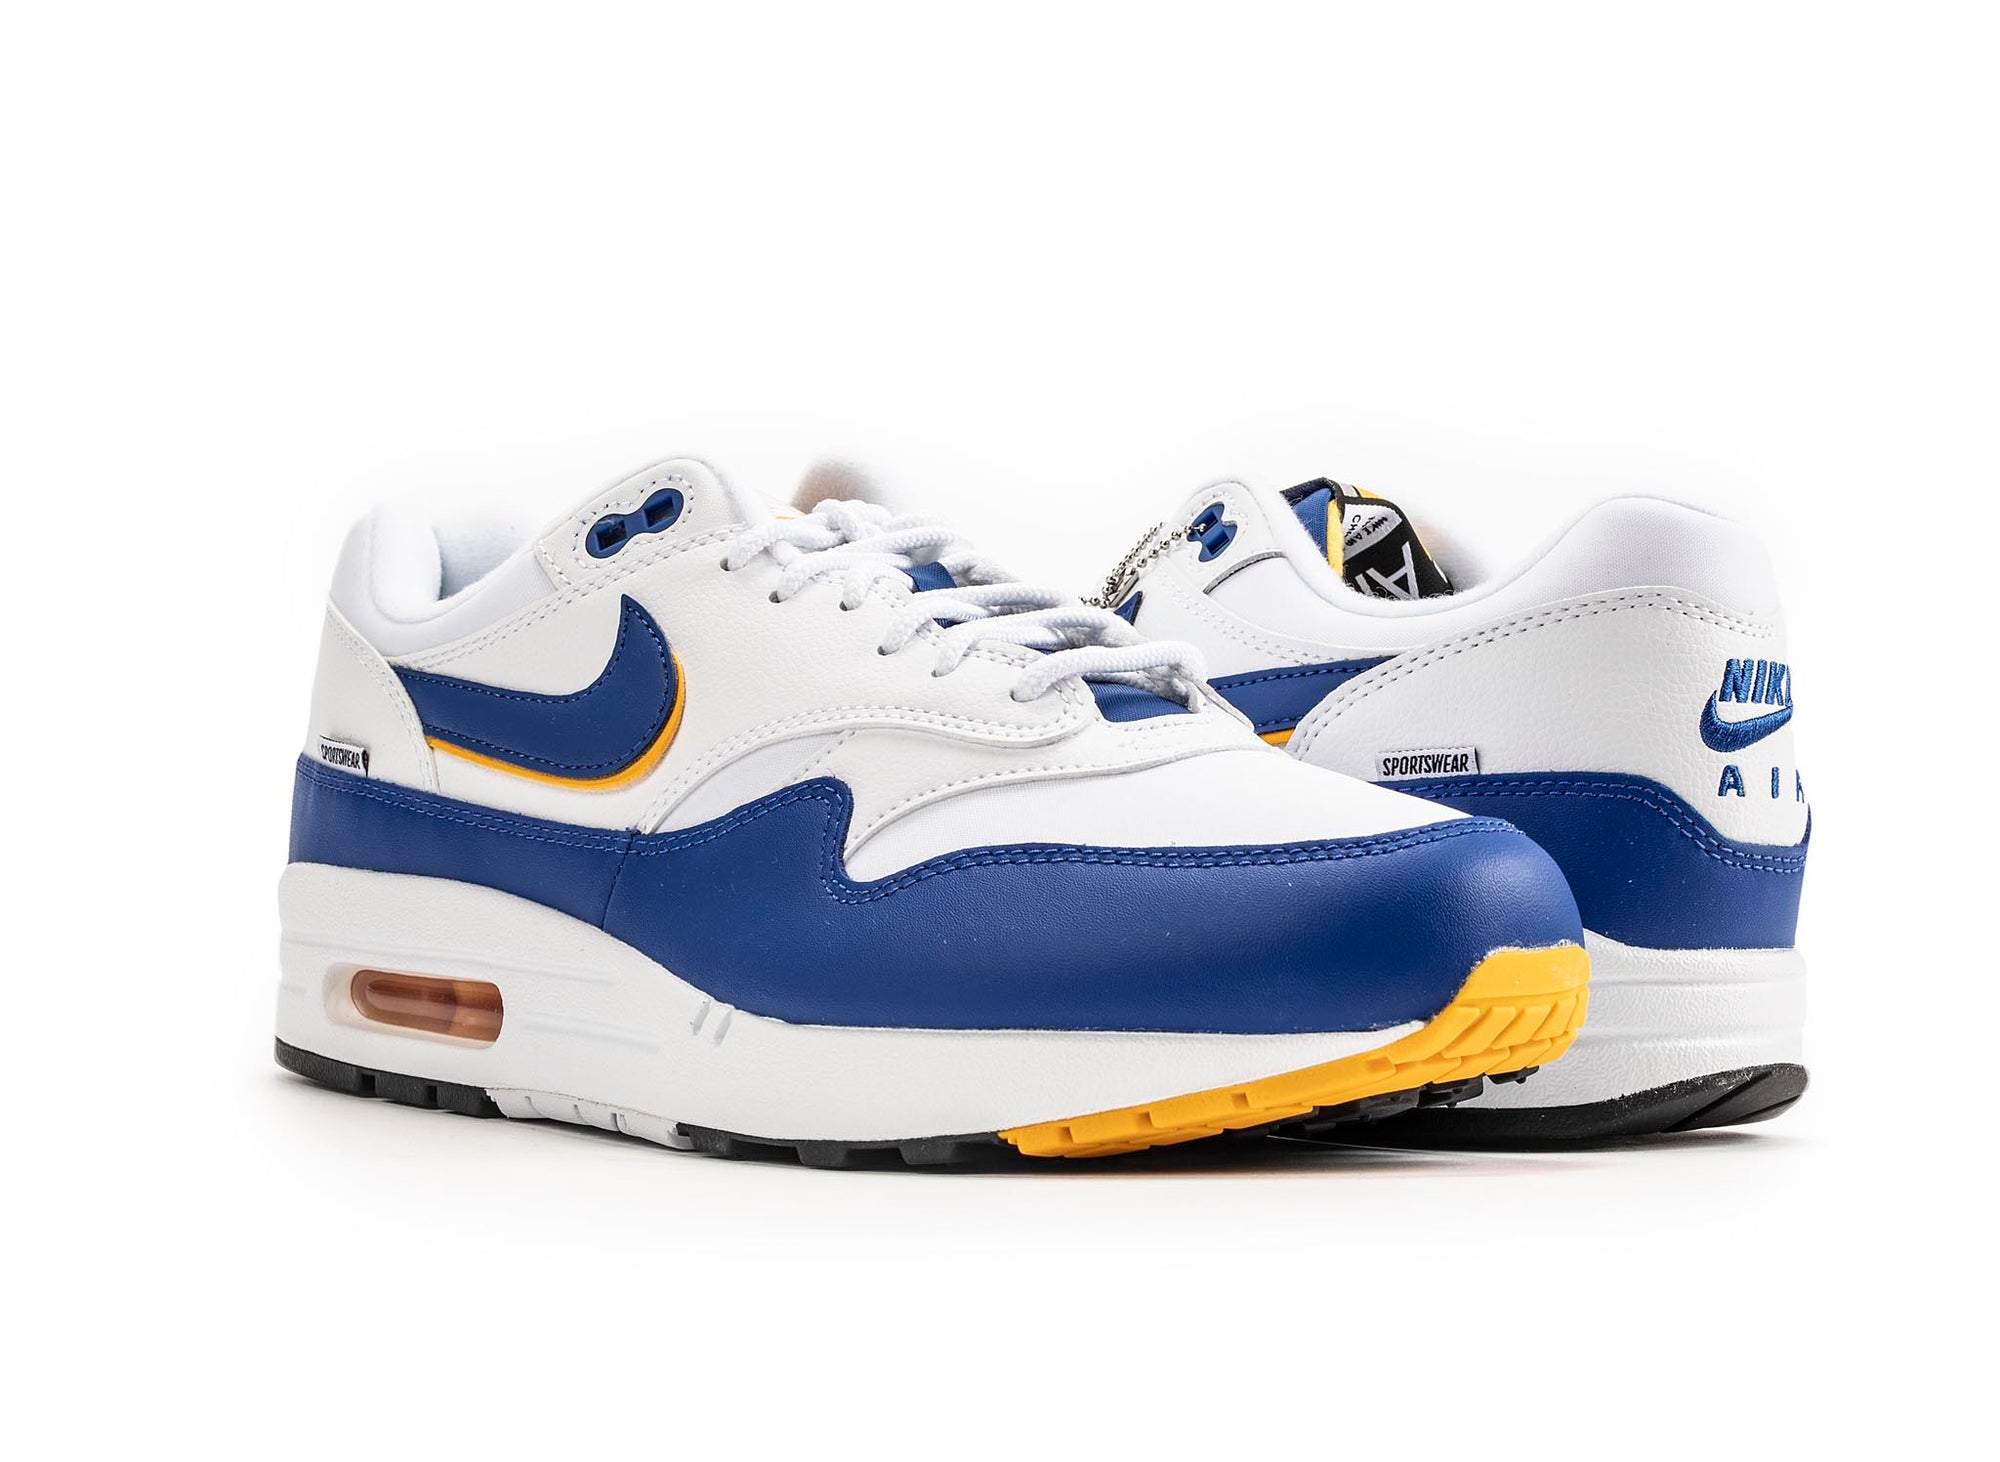 nike air max 1 white and gold